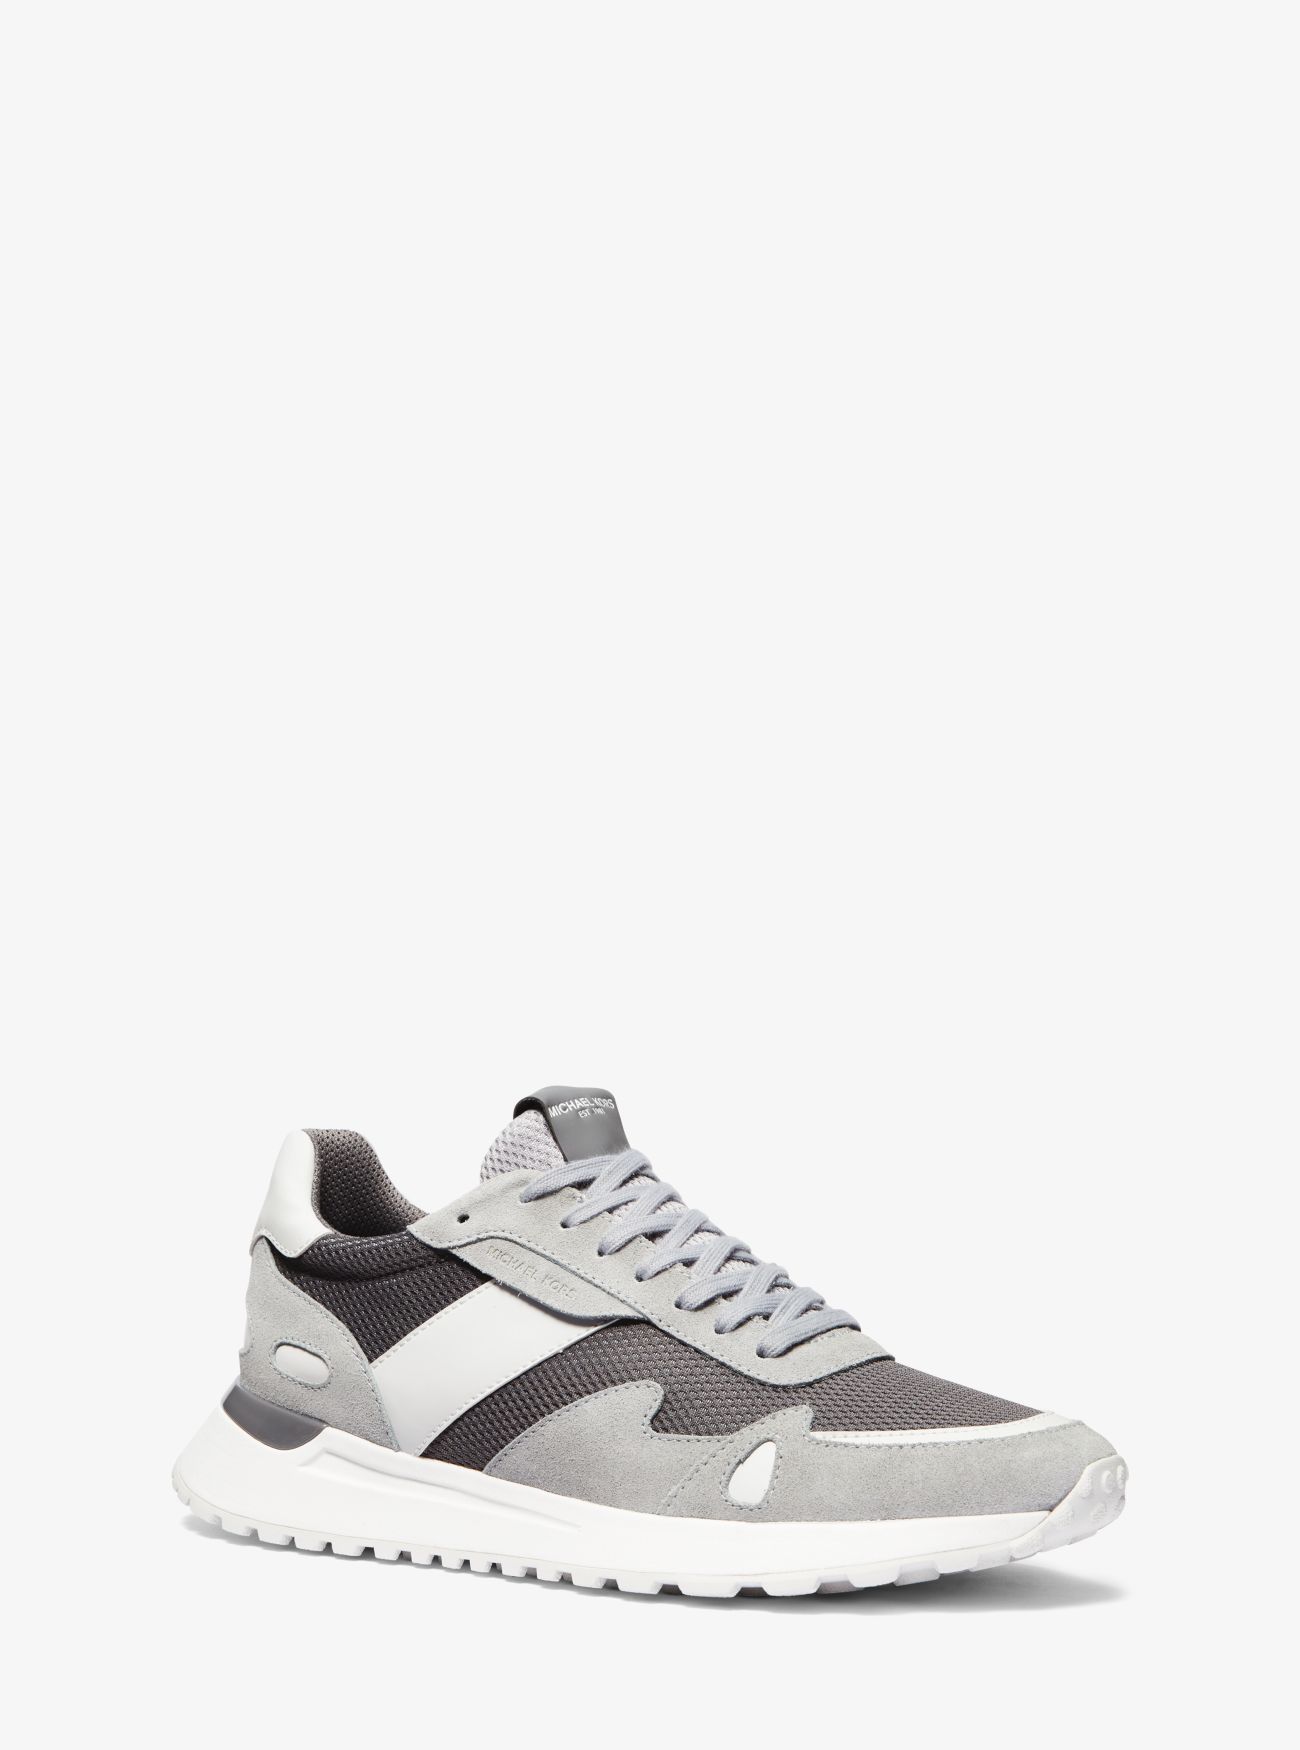 MK Miles Suede and Mesh Trainer - Grey - Michael Kors